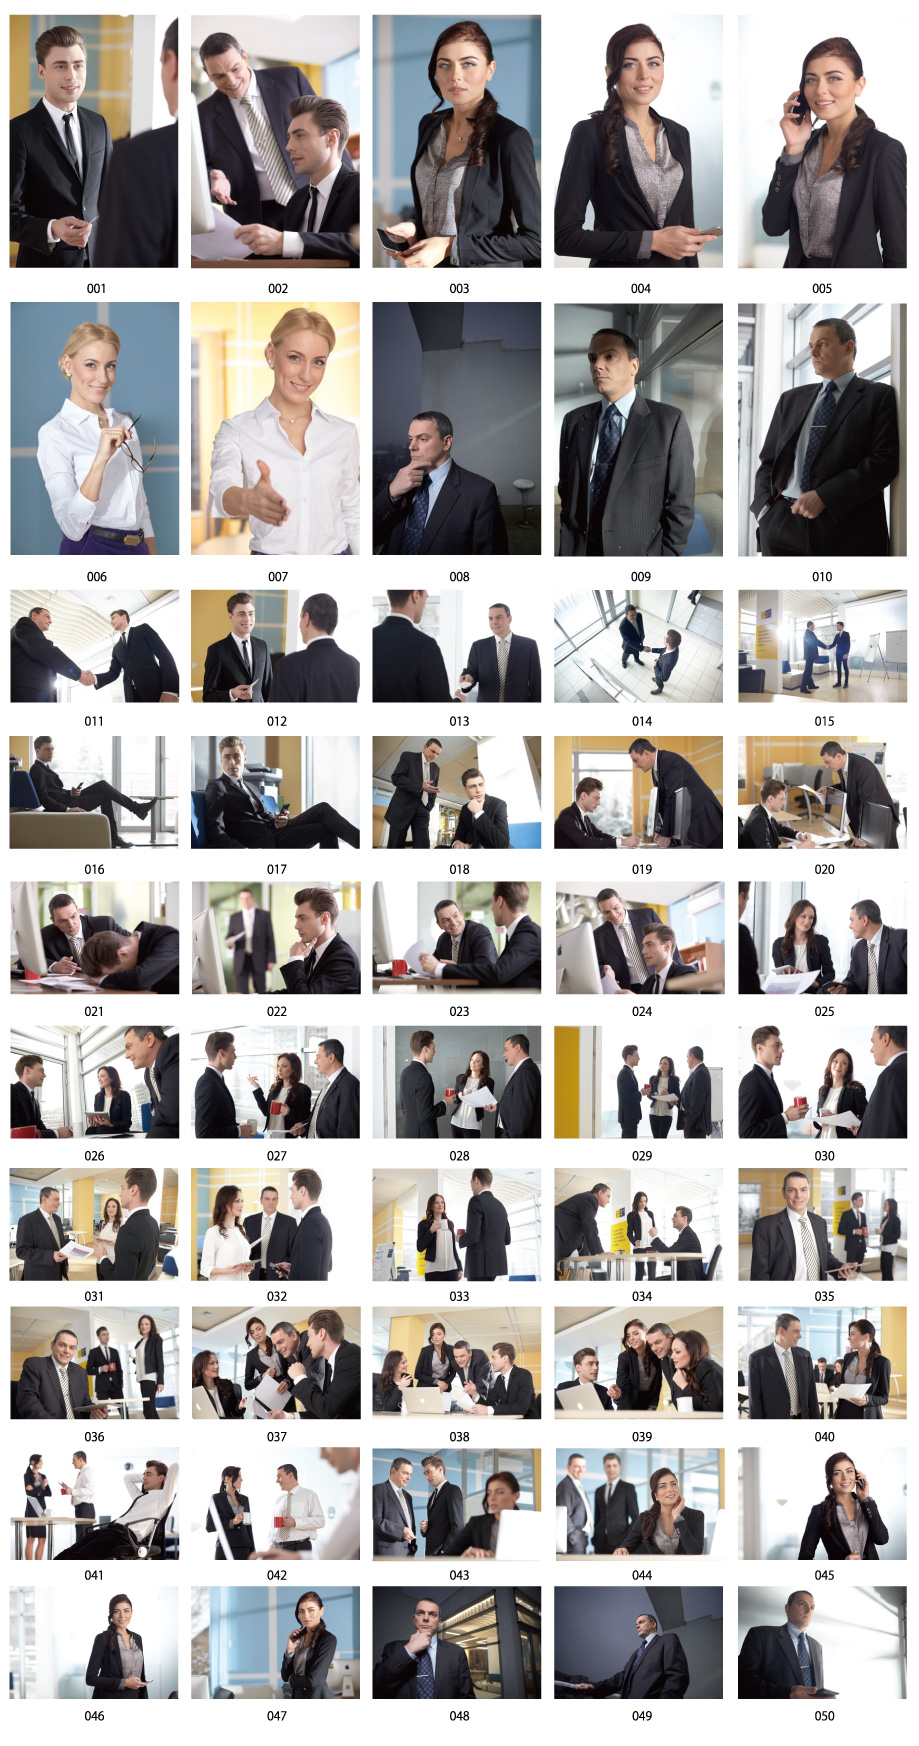 Foreign business photo vol.1